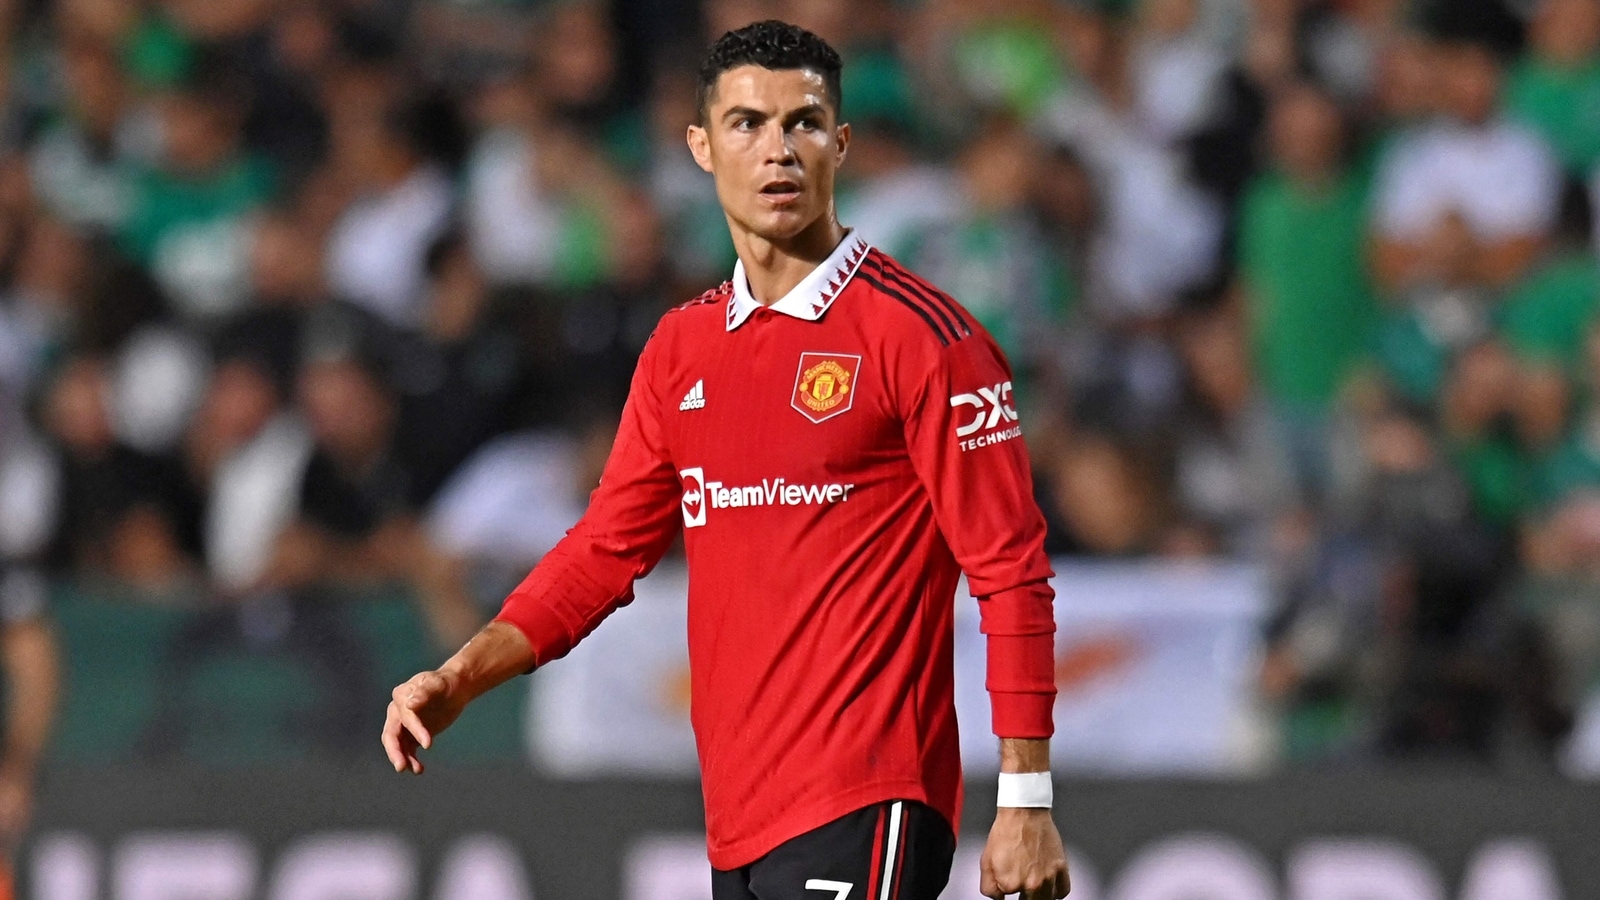 Cristiano Ronaldo to leave? Manchester United star receives huge update ahead of winter transfer window